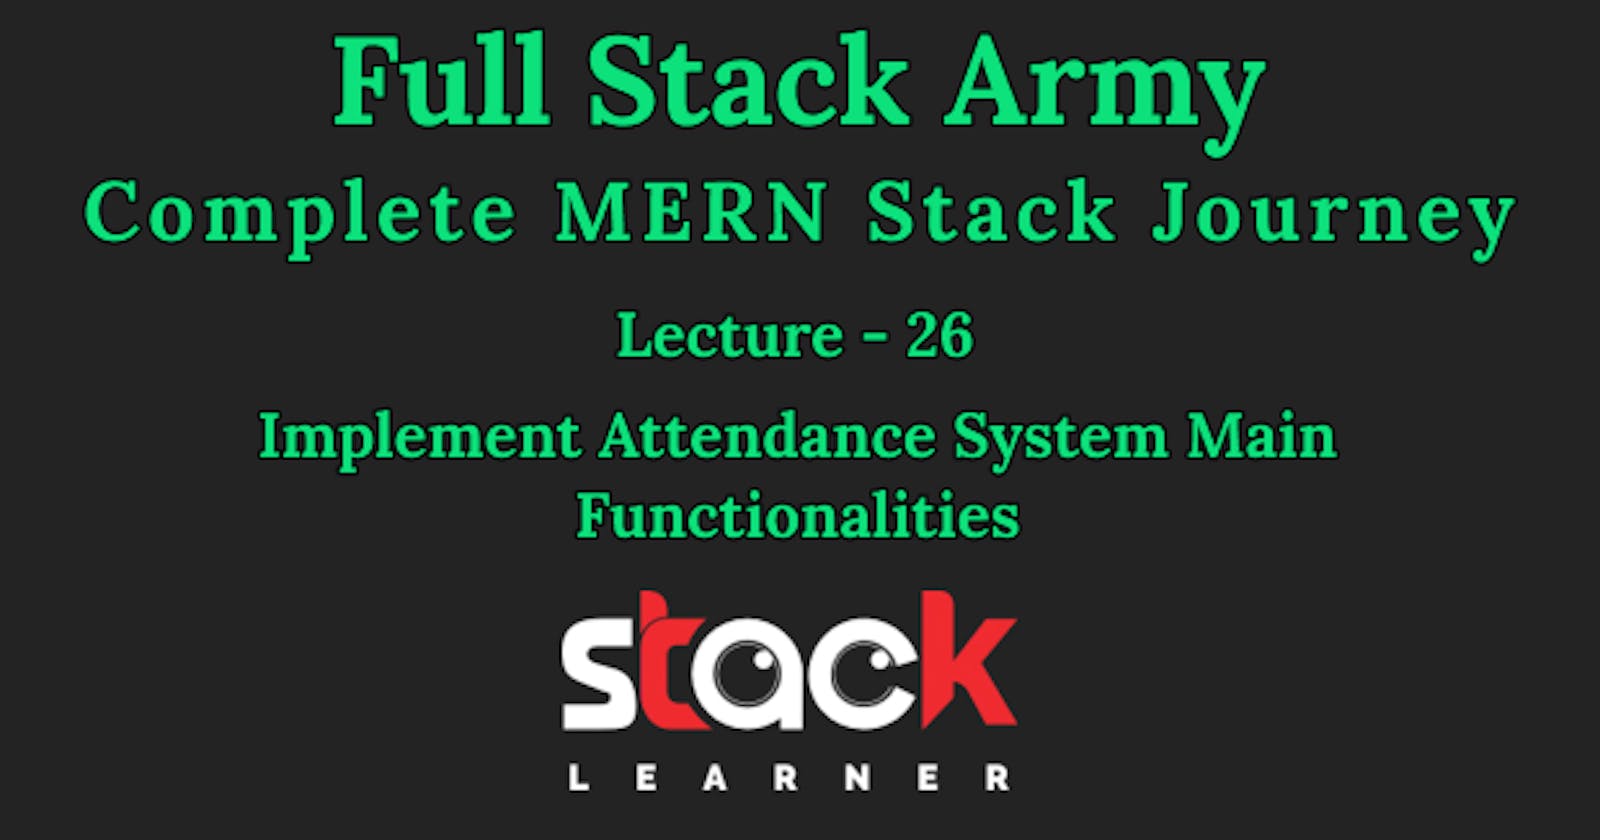 Lecture 26 - Implement Attendance System Main Functionalities